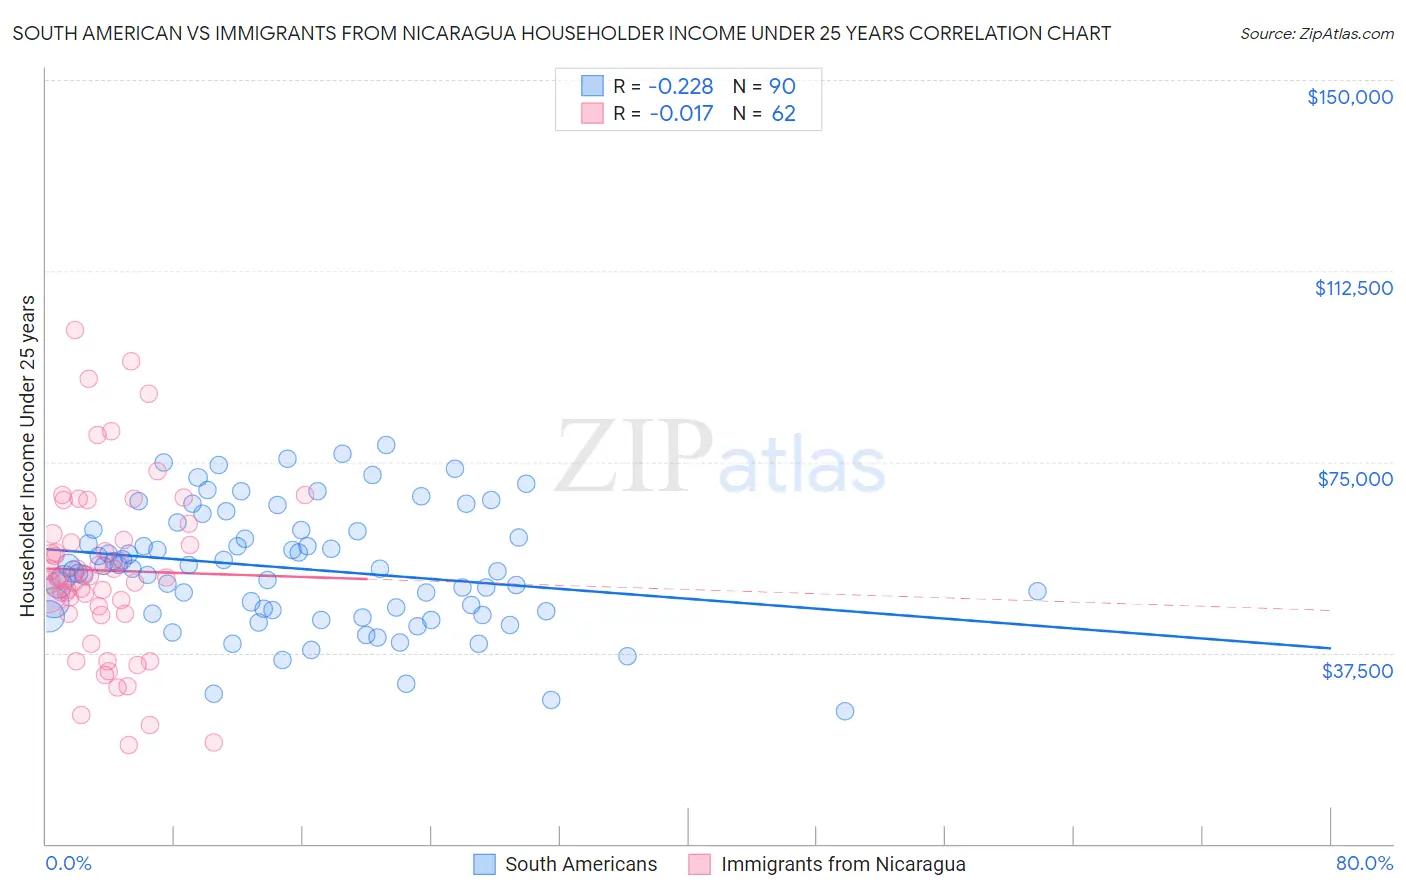 South American vs Immigrants from Nicaragua Householder Income Under 25 years